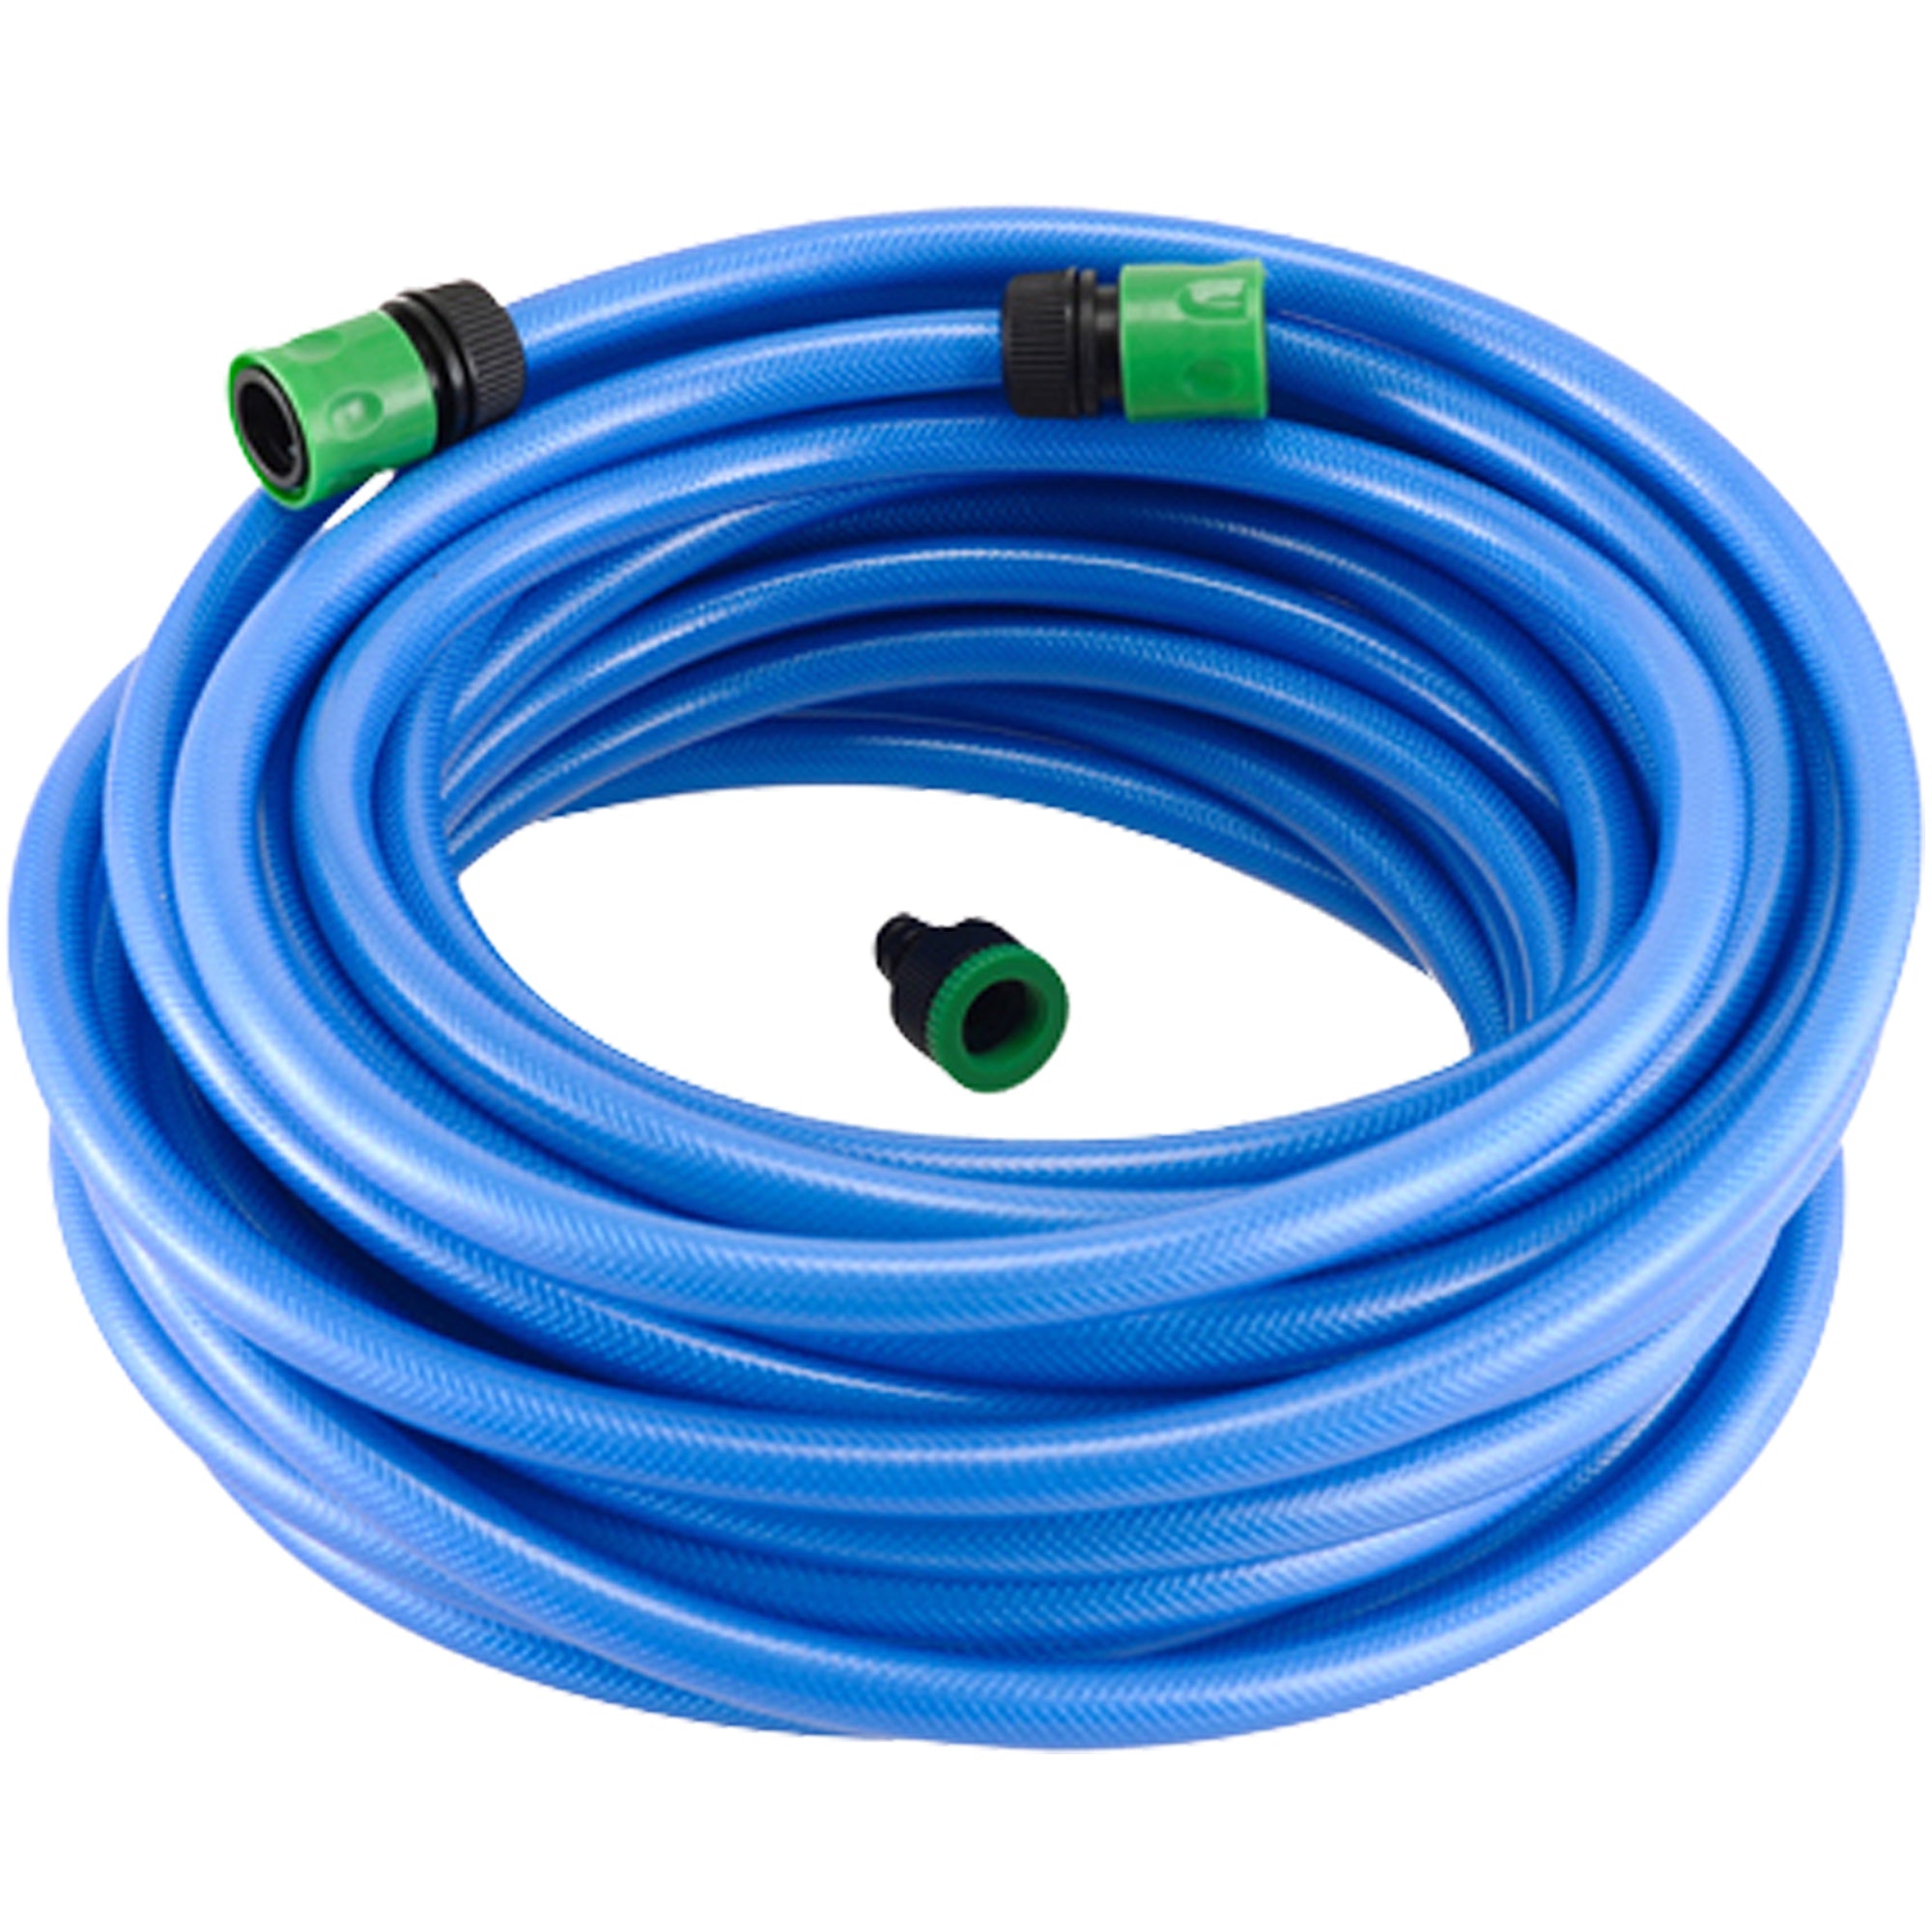 16mm DRINKING WATER HOSE